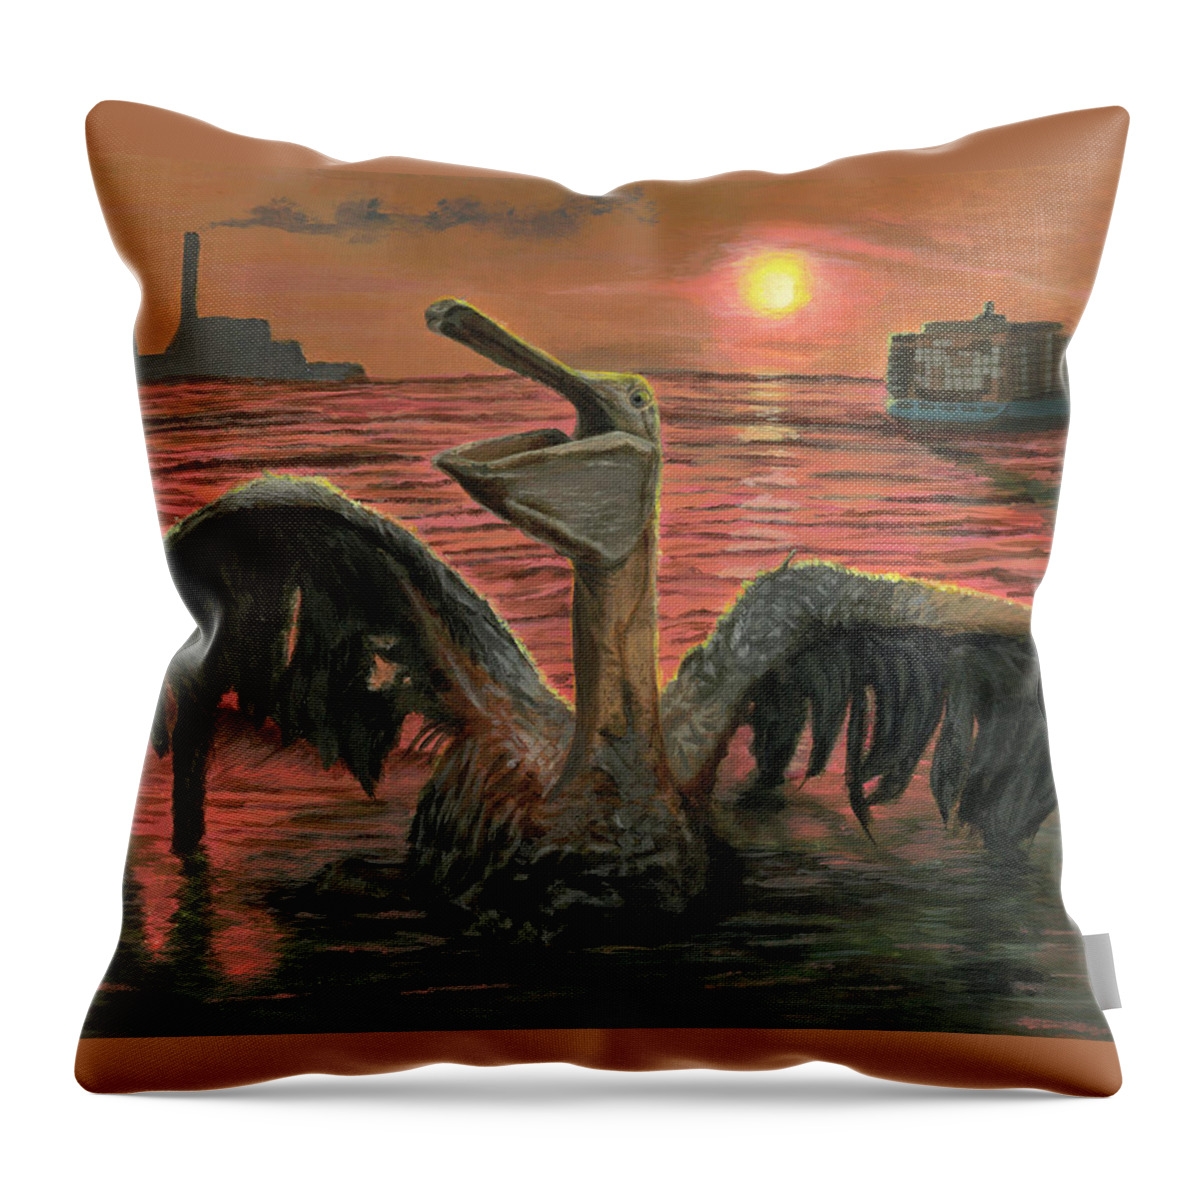 Oil Spill Throw Pillow featuring the painting The Cost of Oil by Jiahong Tian Grade 10 by California Coastal Commission